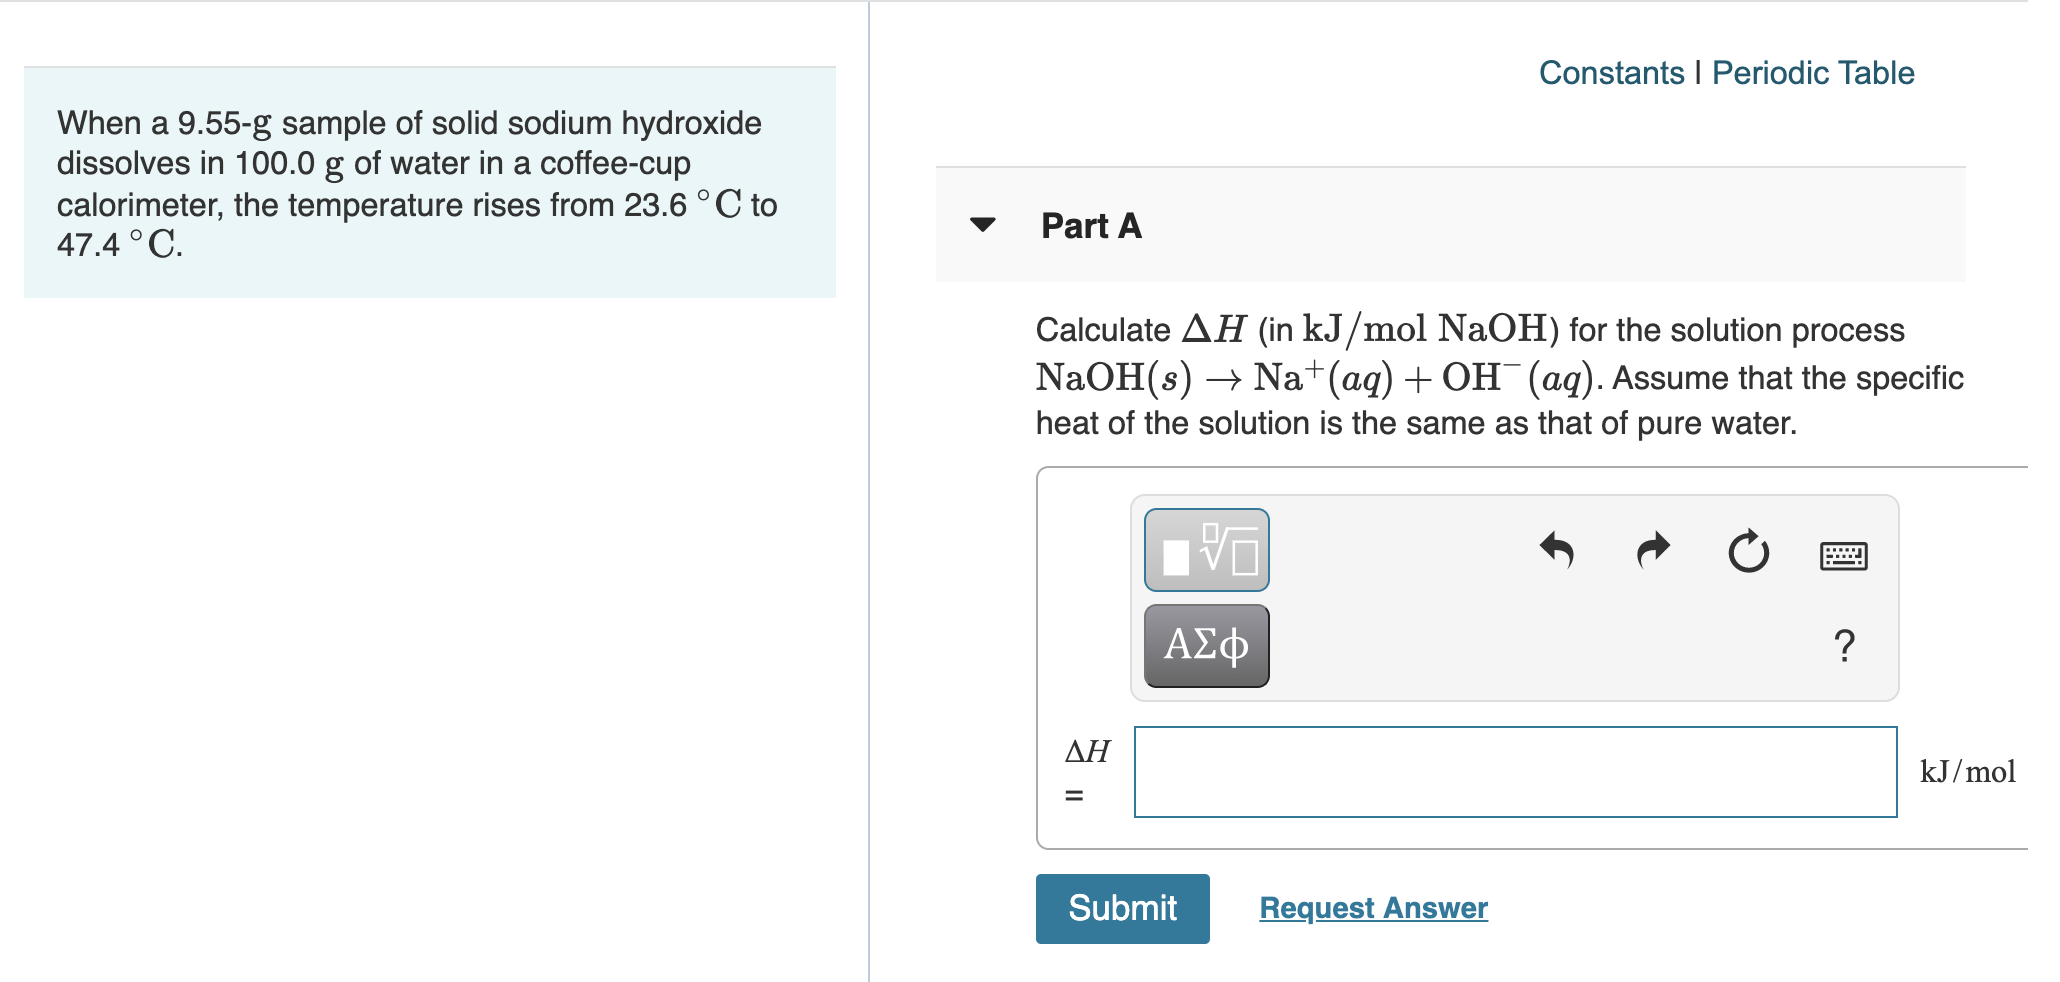 When a 9.55-g sample of solid sodium hydroxide
dissolves in 100.0 g of water in a coffee-cup
calorimeter, the temperature rises from 23.6 ° C to
47.4 °C.
Part A
Calculate AH (in kJ/mol NaOH) for the solution process
NaOH(s) → Na+(ag) + OH¯(aq). Assume that the specific
heat of the solution is the same as that of pure water.
